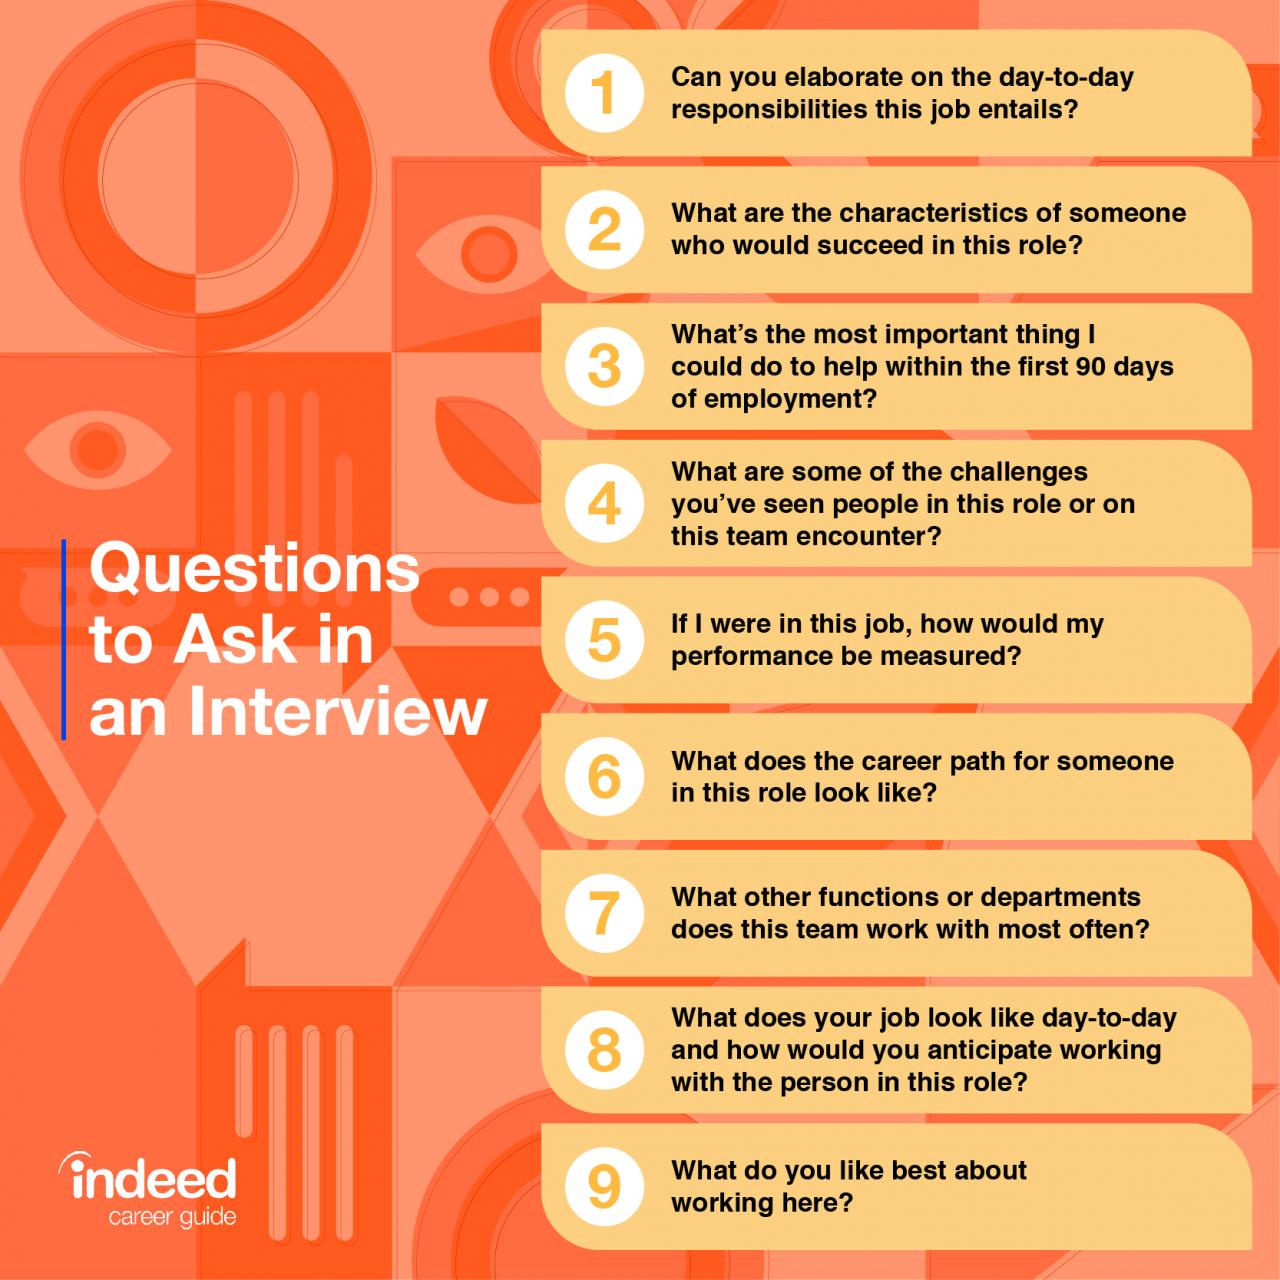 Good questions to ask the interviewer in an interview